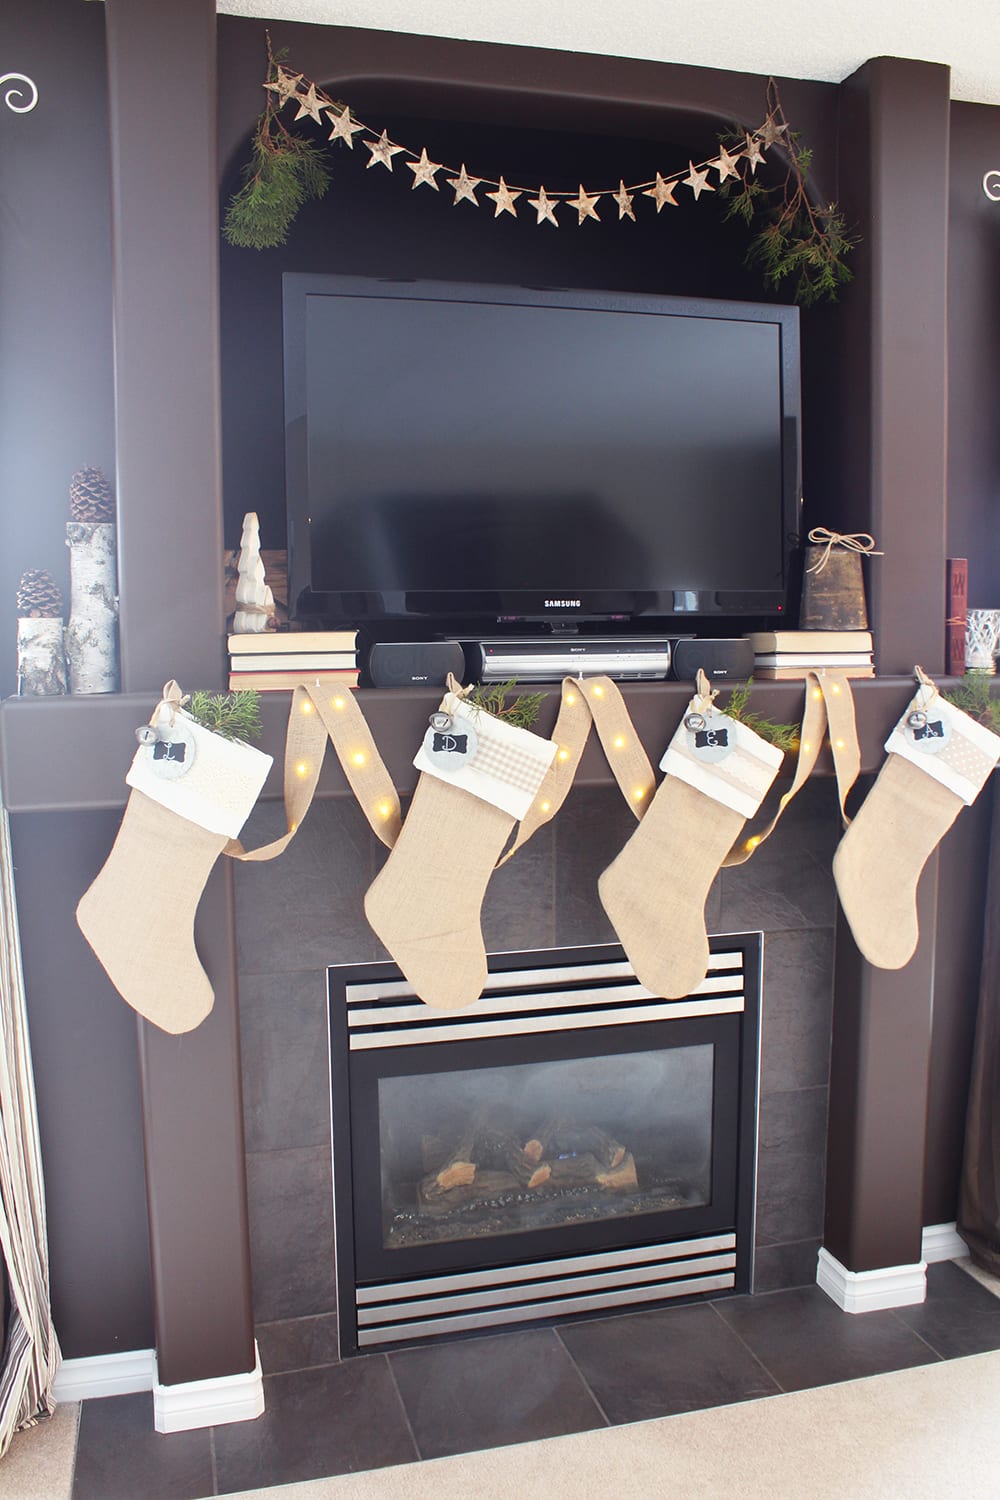 Nature inspired holiday decor featuring burlap stockings, birch logs, a star garland and fresh greenery.